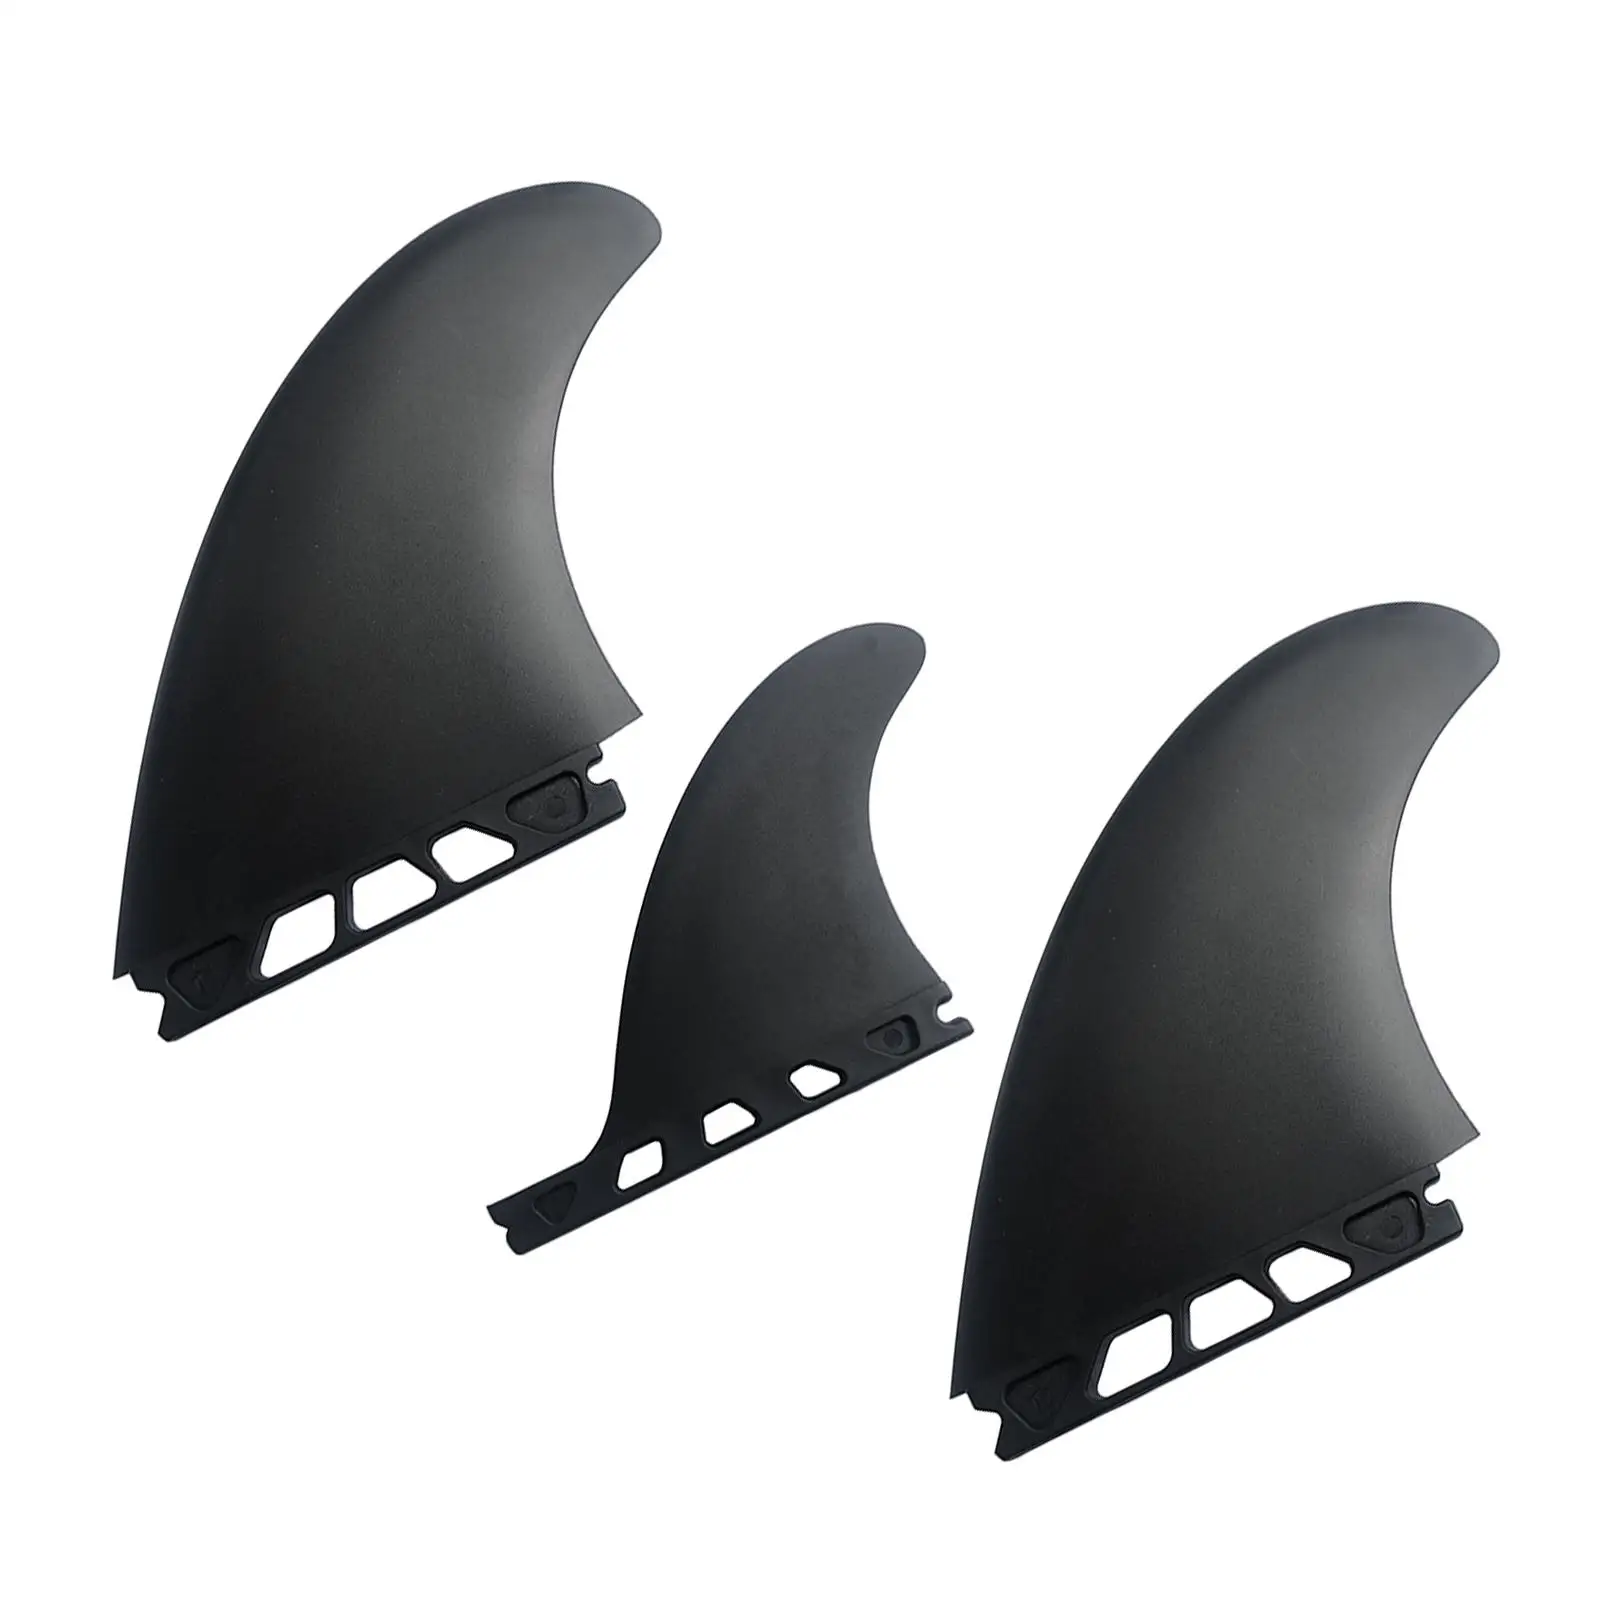 3Pcs Universal Surfboard Fins, Quick Release Surfing Fin for Boat Kayak Longboard Paddleboard Accessory